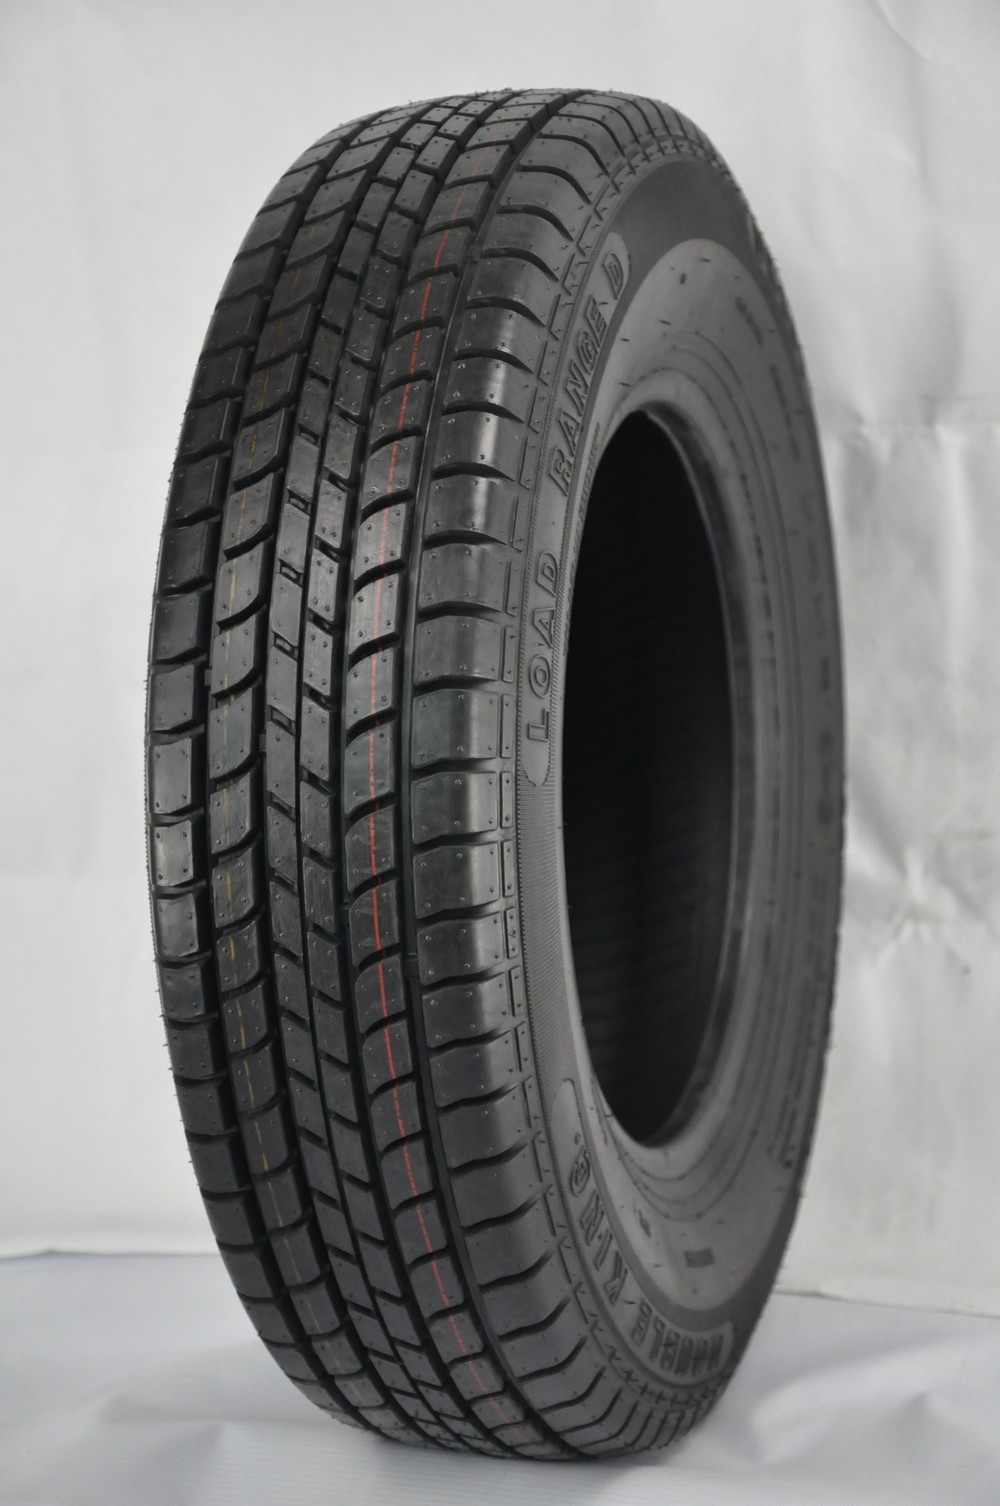 Habielad Aptany Brands All Series Car Tire for Sale